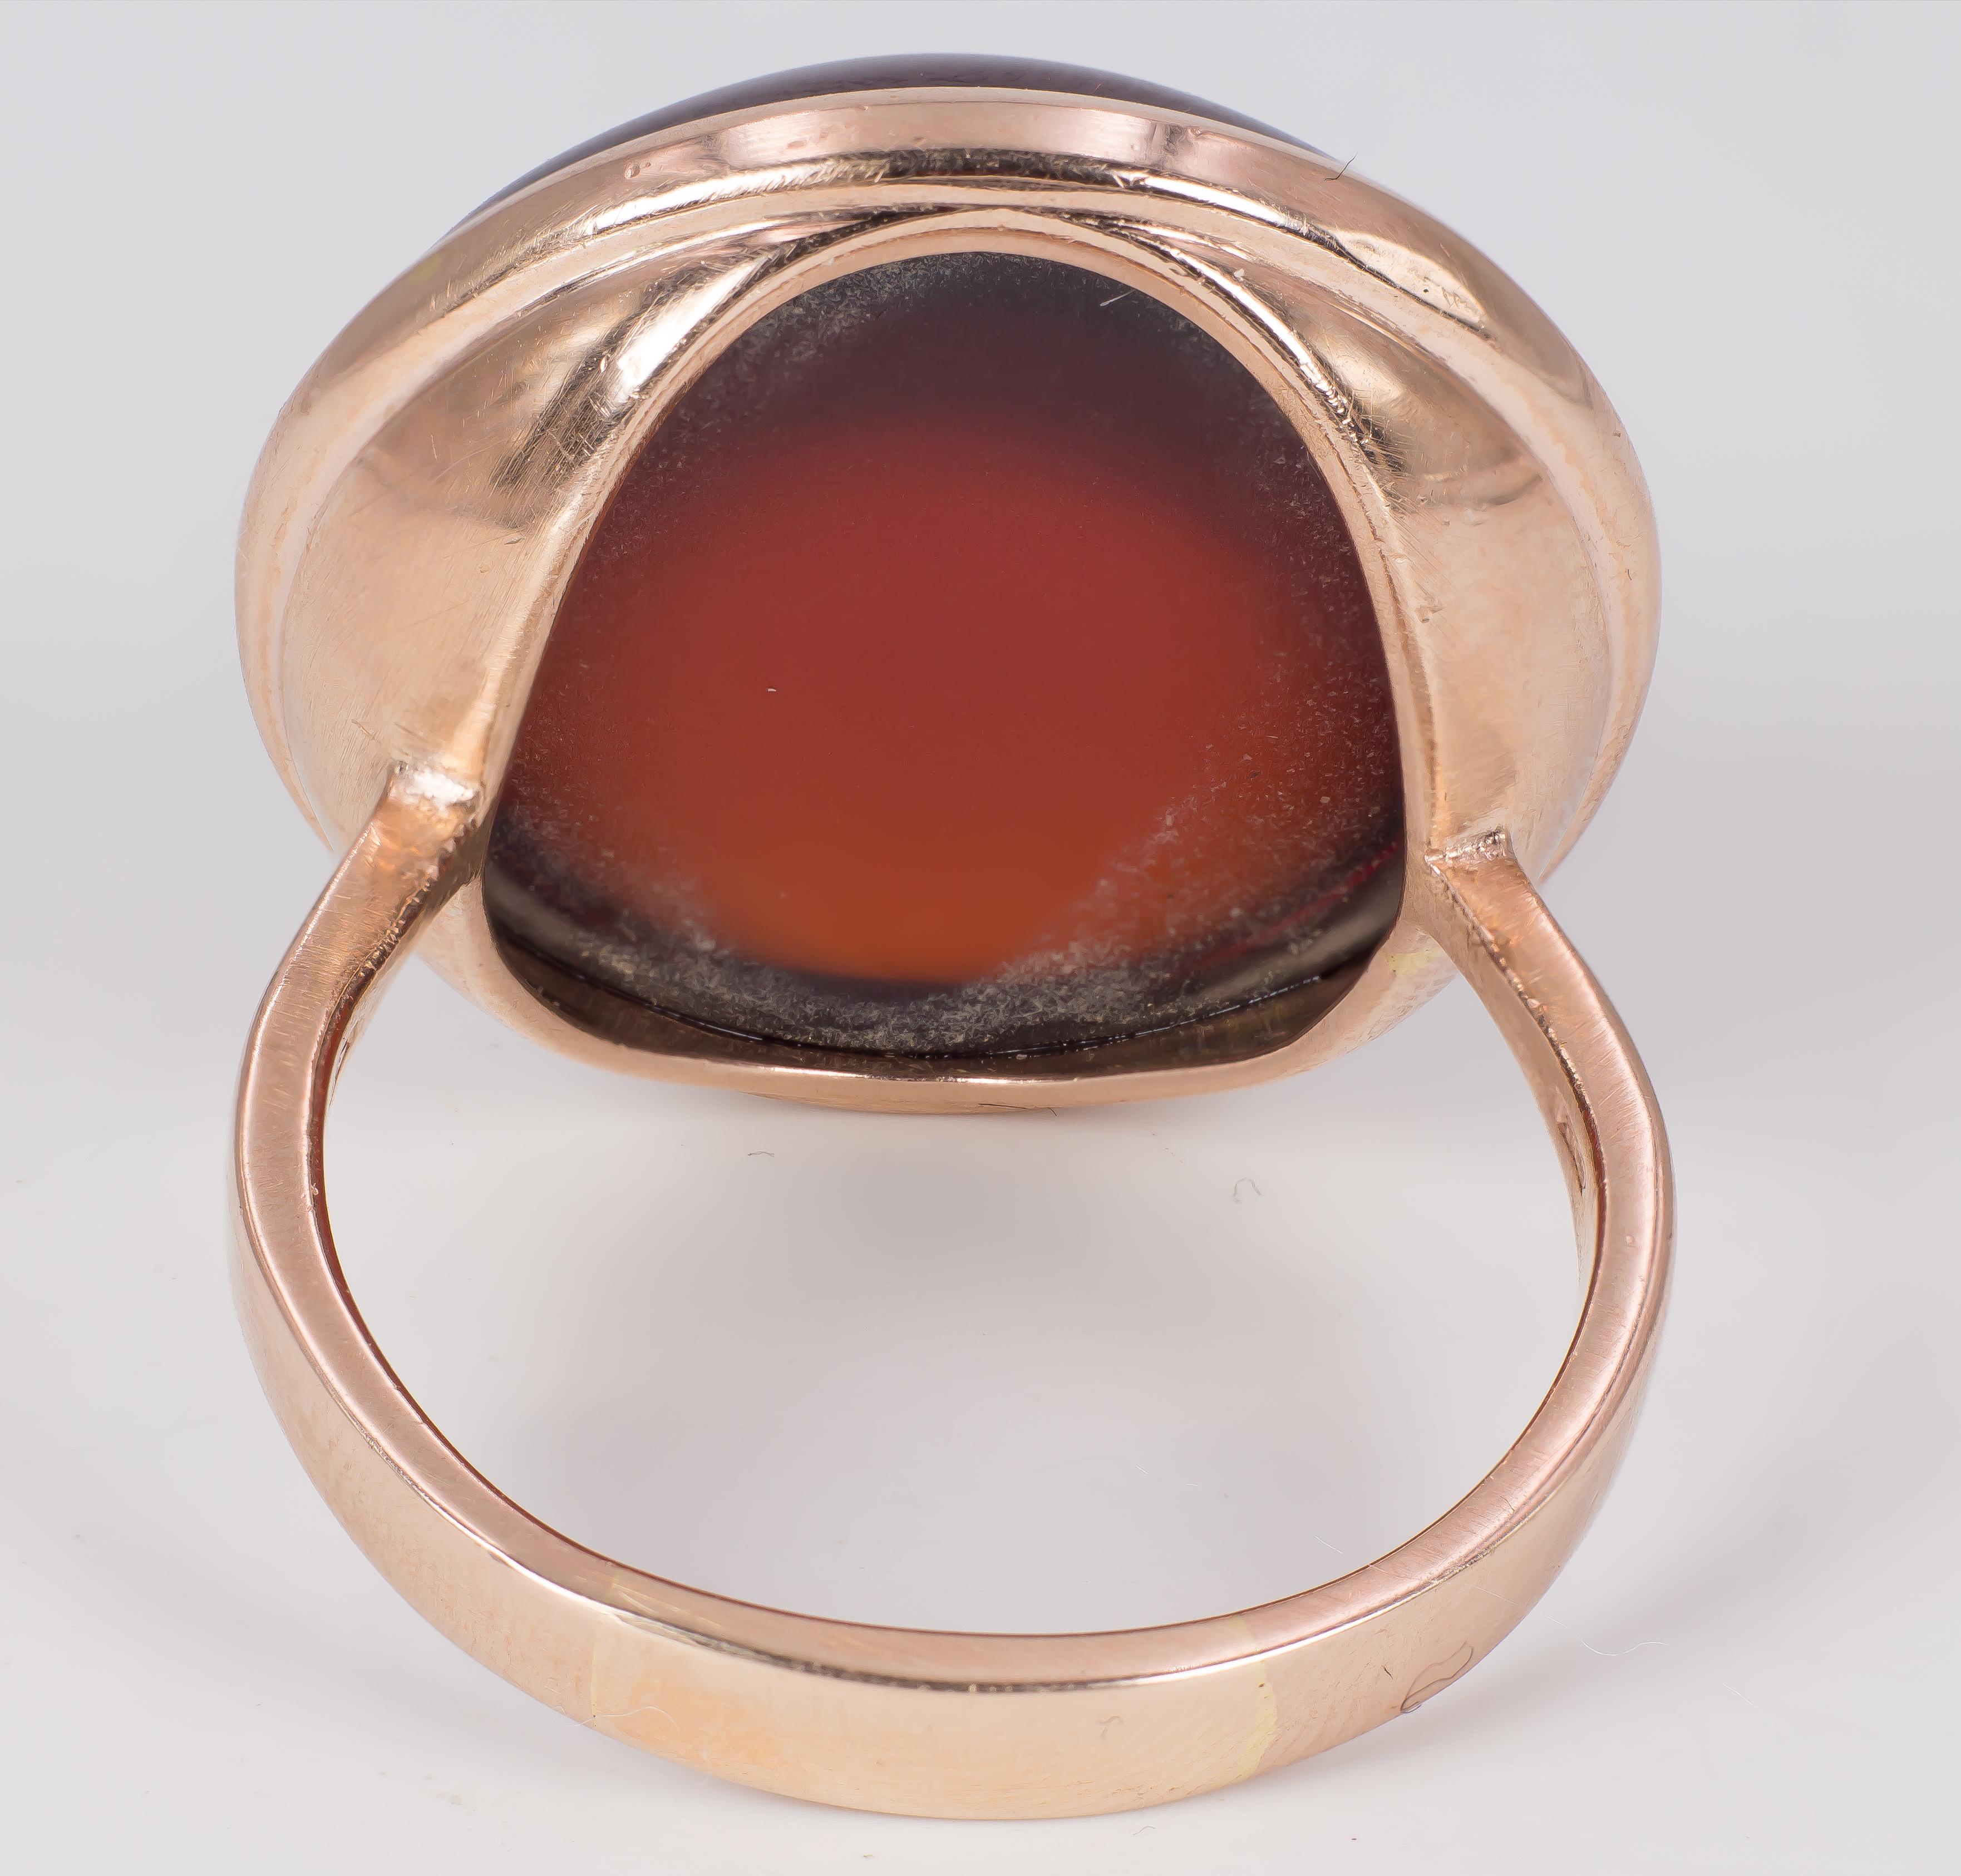 Women's Vintage 9 Karat Gold and Carnelian Ring, 1960s For Sale